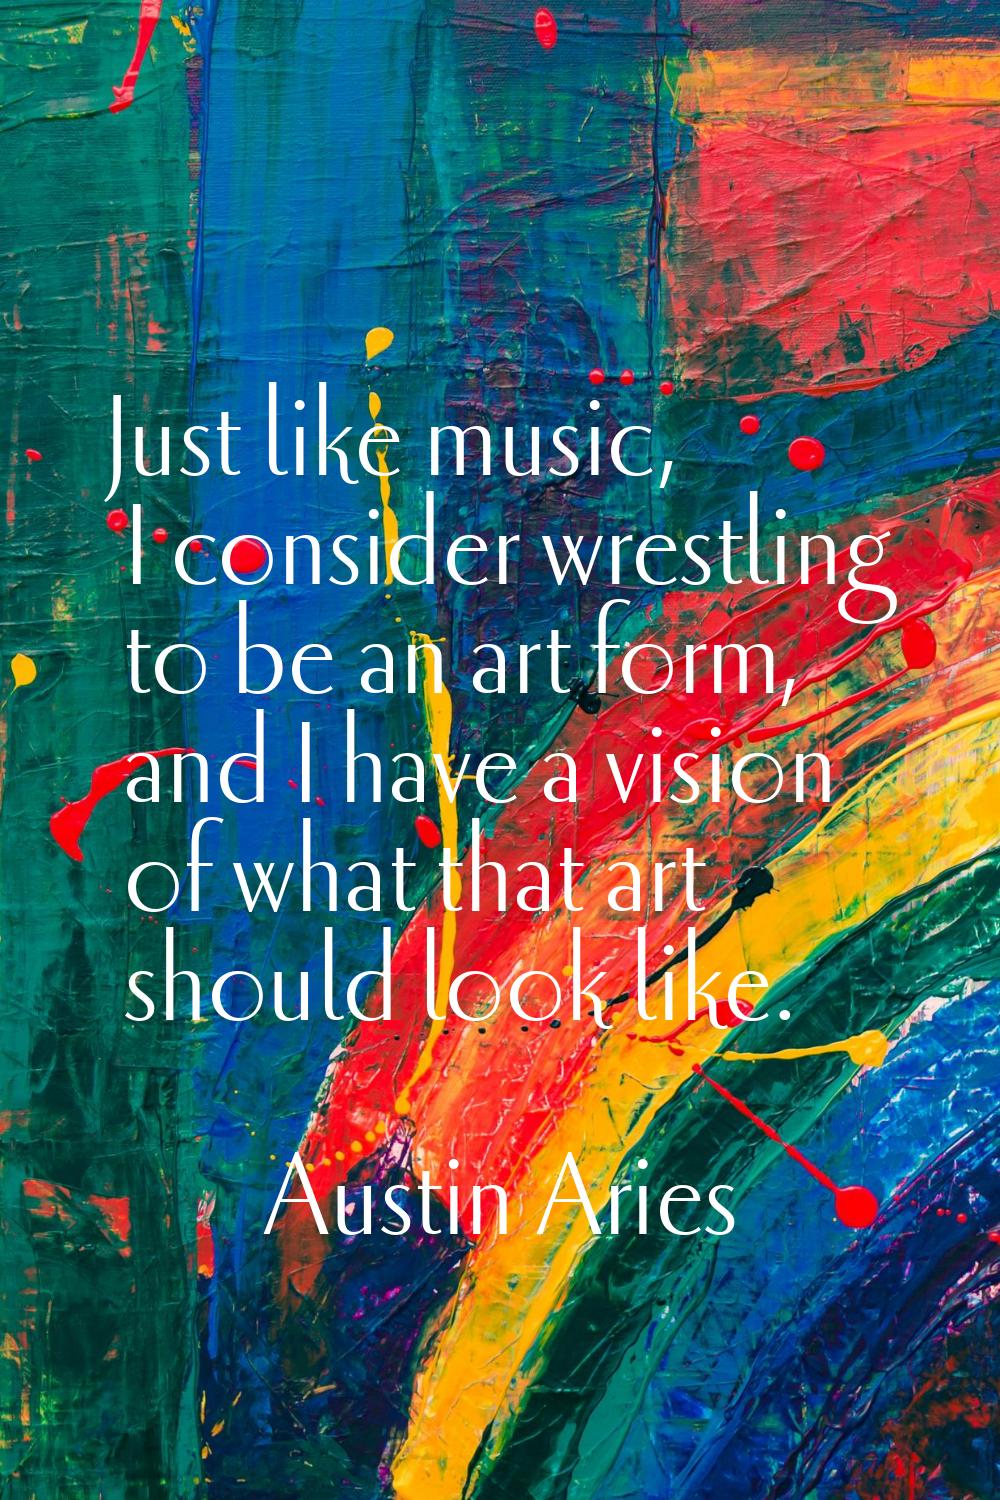 Just like music, I consider wrestling to be an art form, and I have a vision of what that art shoul